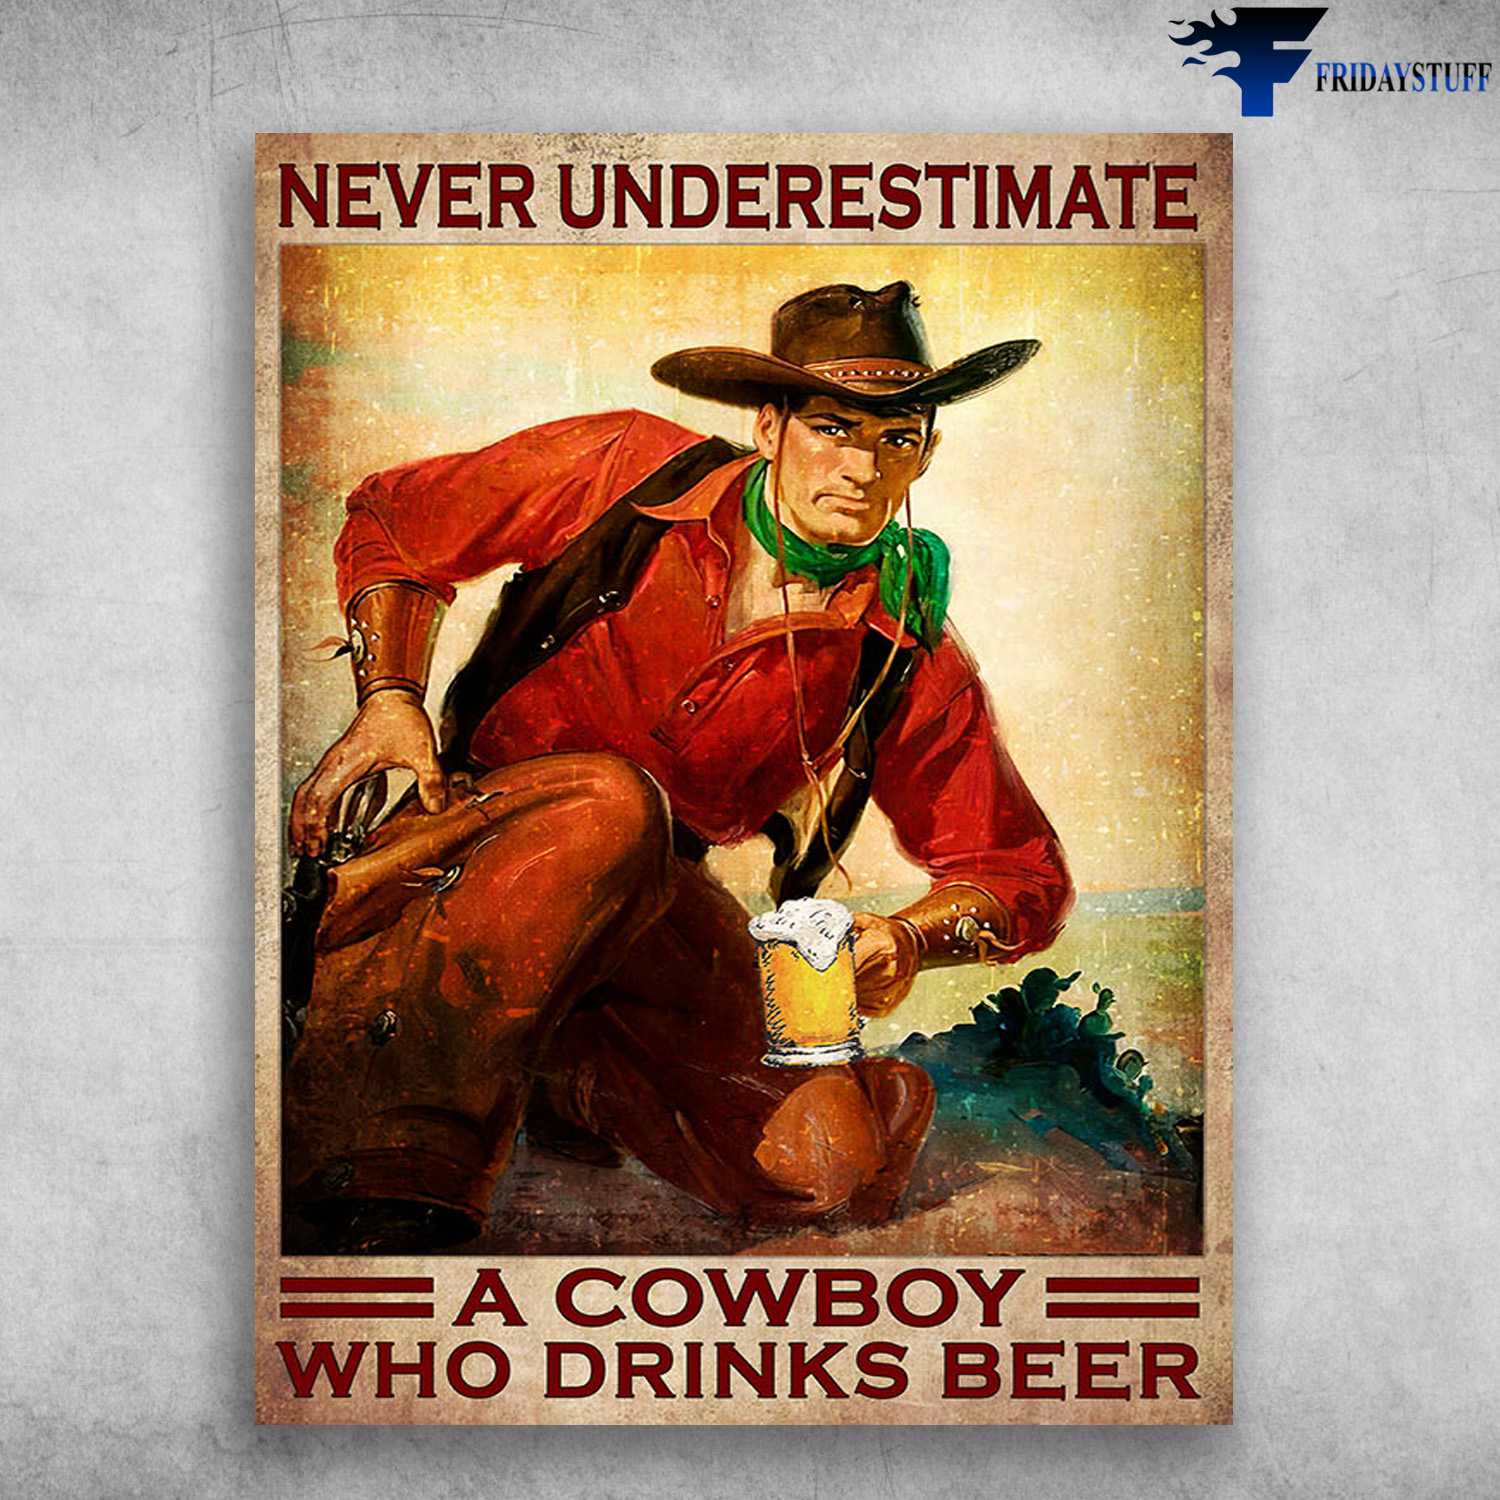 Cowboy Loves Beer, Cowboy Poster - Never Underestimate A Cowboy, Who Drinks Beer